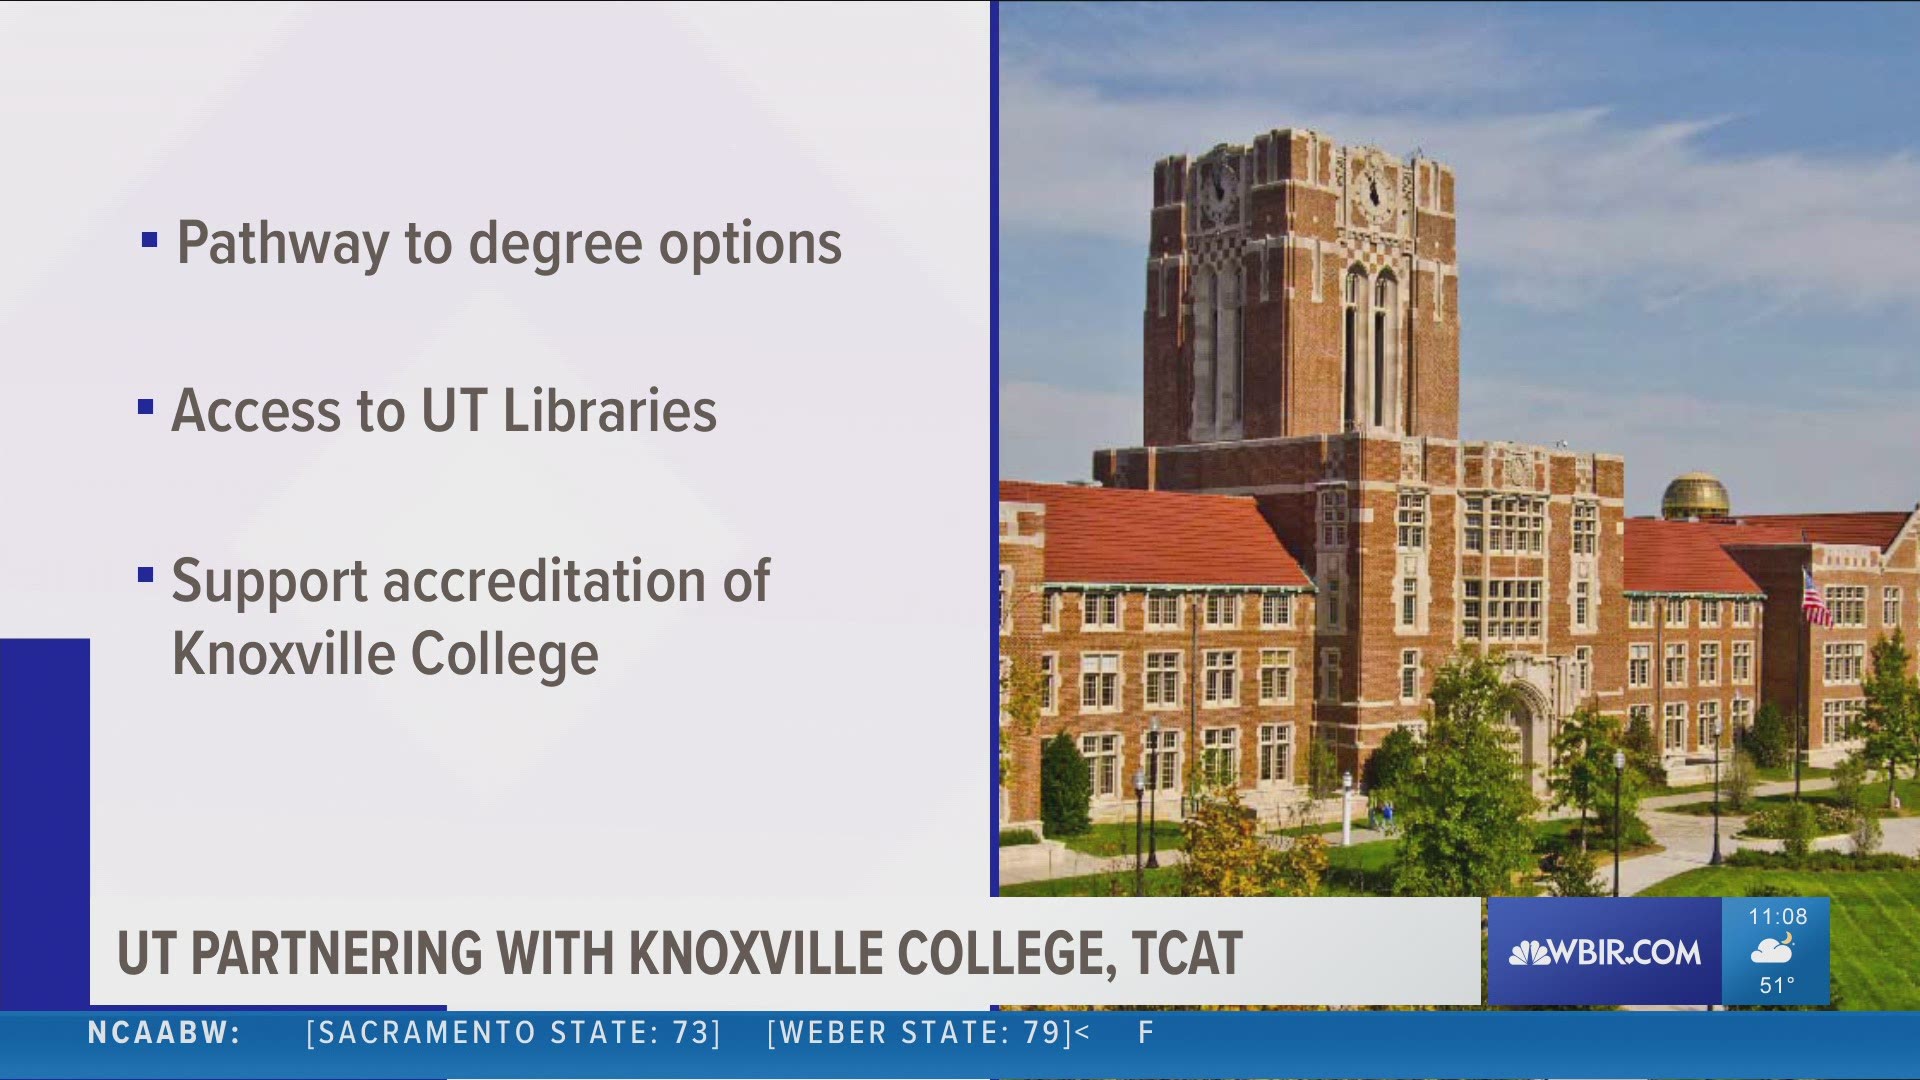 The University of Tennessee partnered with other regional institutions to make higher education more accessible for everyone.